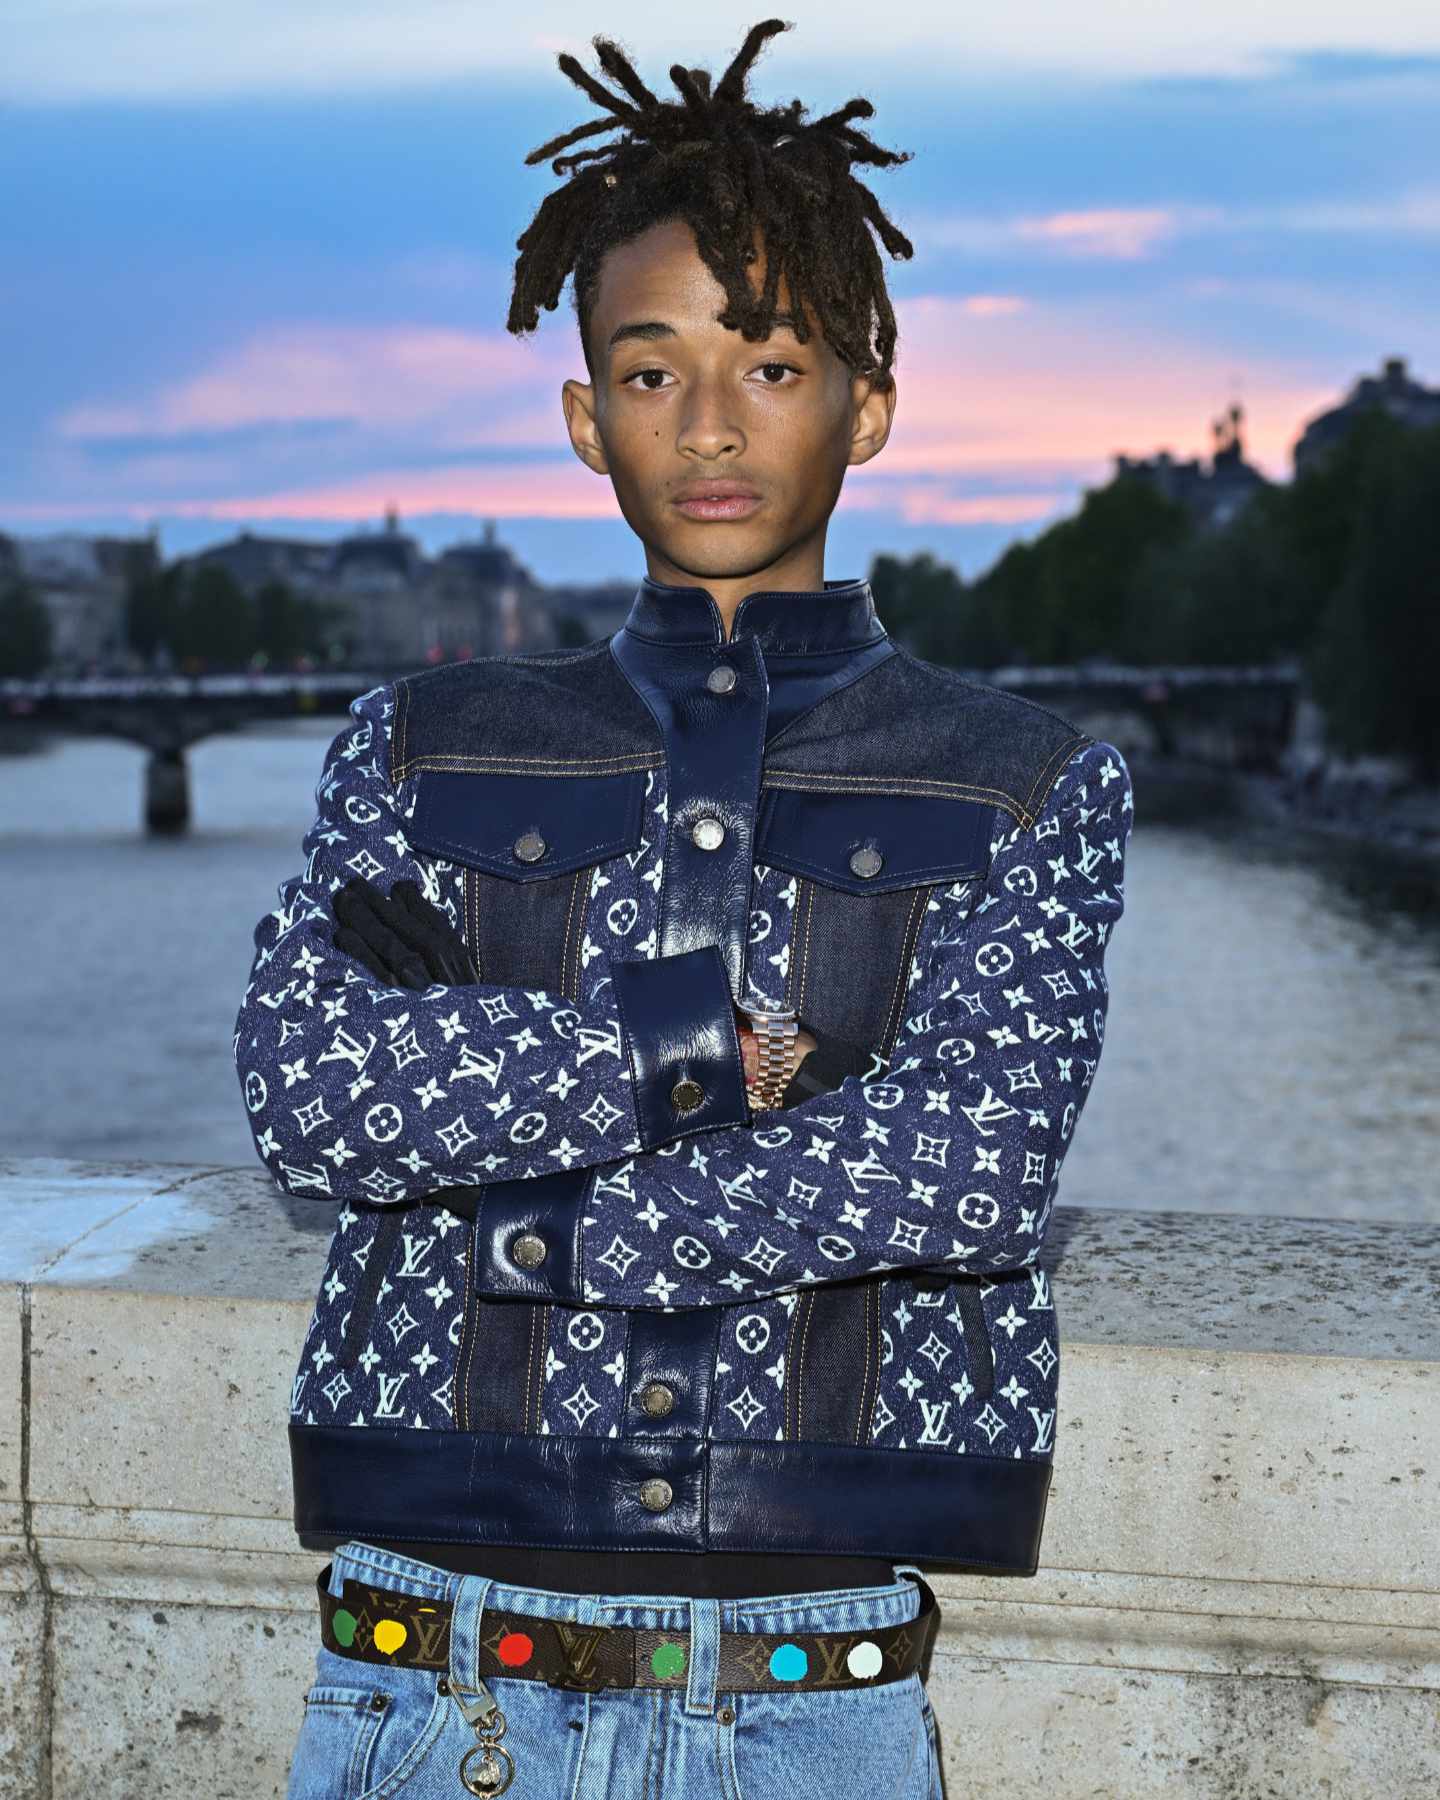 Jaden Smith Wears Graphic Suit From His MSFTSrep Brand & Chelsea Boots –  Footwear News